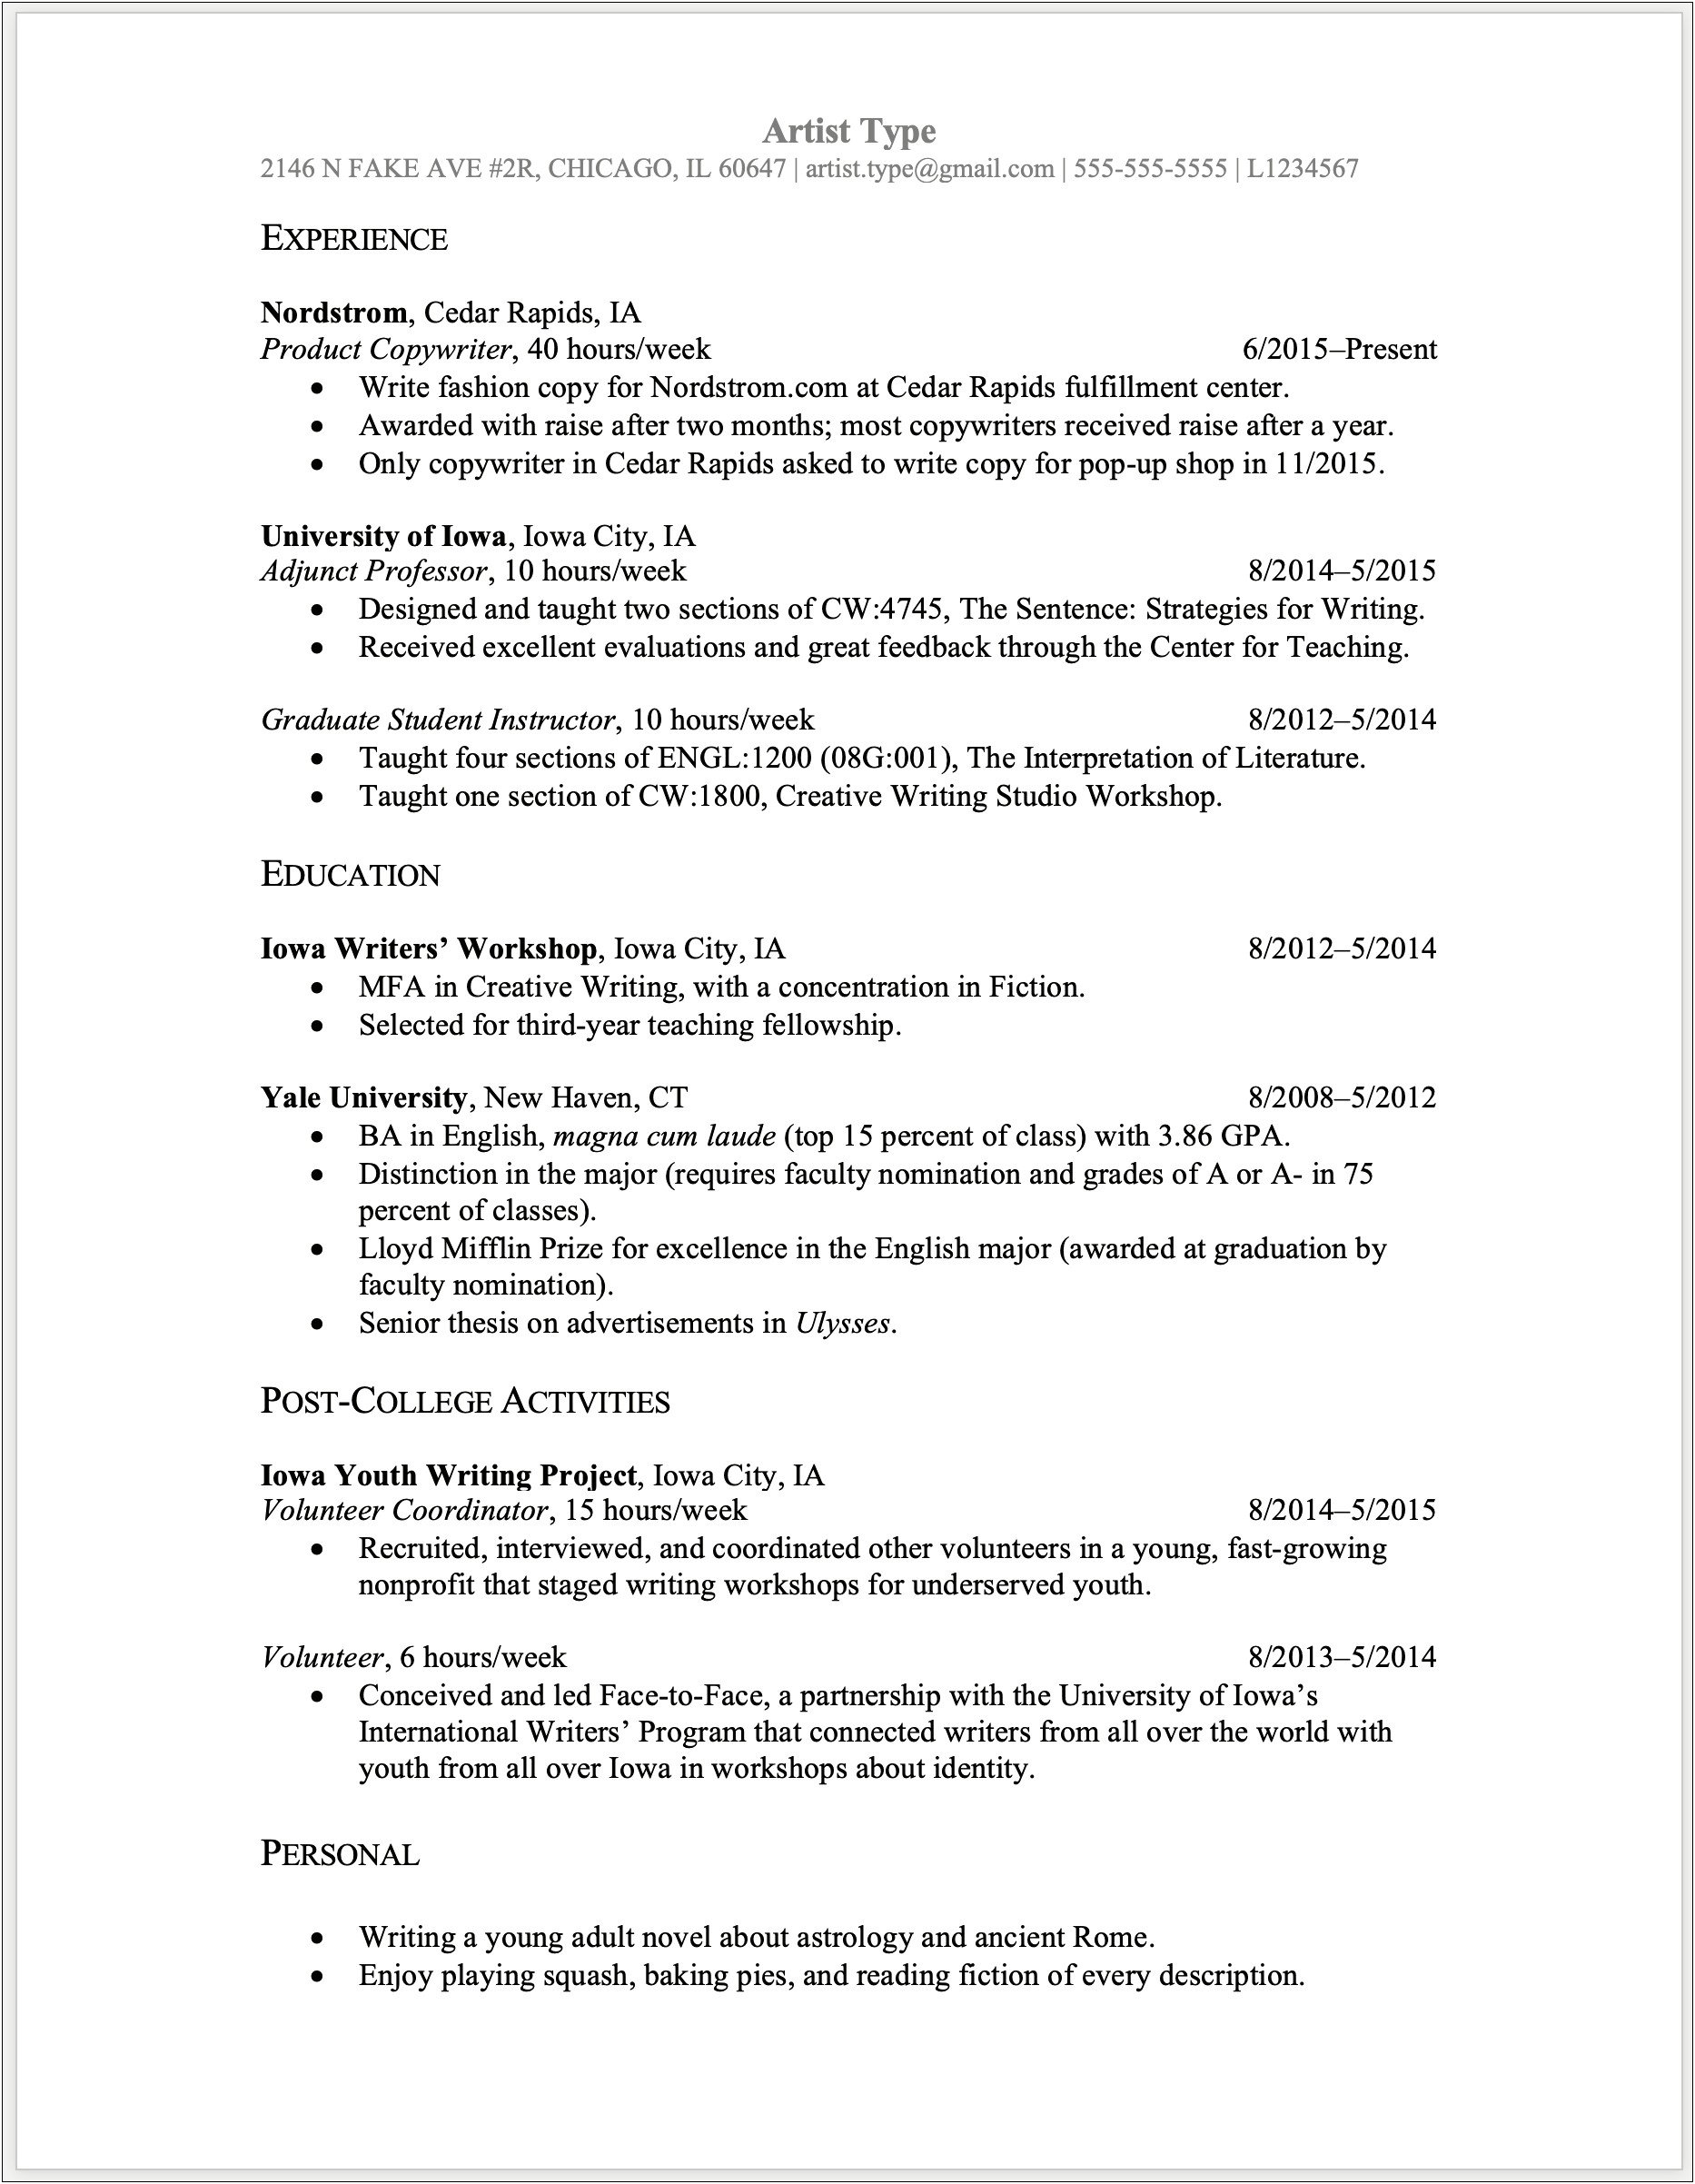 Resume Trying To Get Into Graduate School